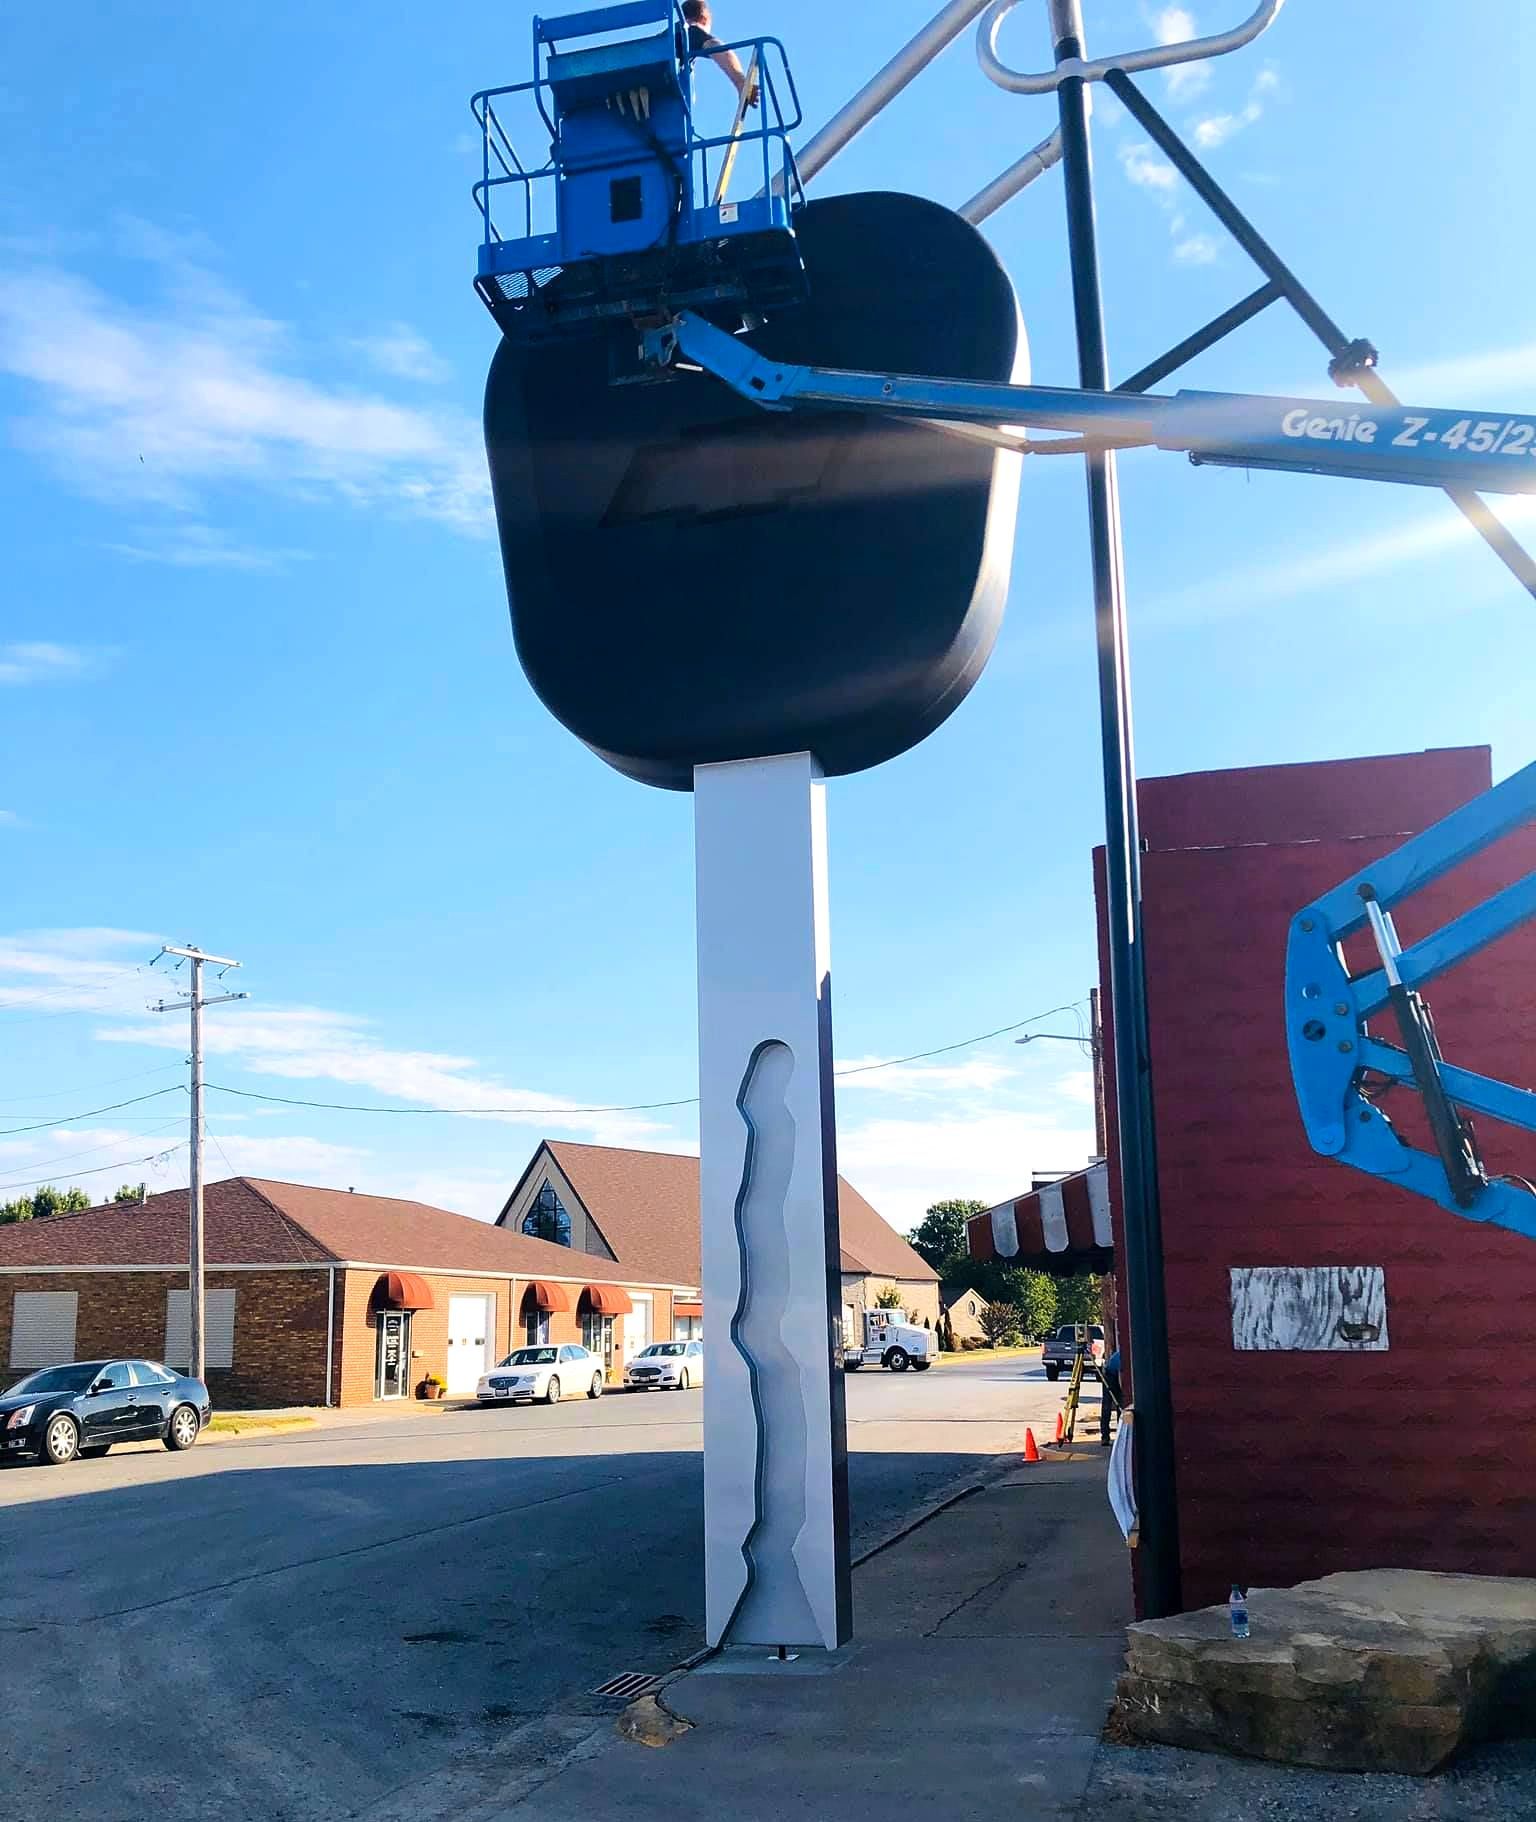 World's Largest Truck Key, world record in Casey, Illinois